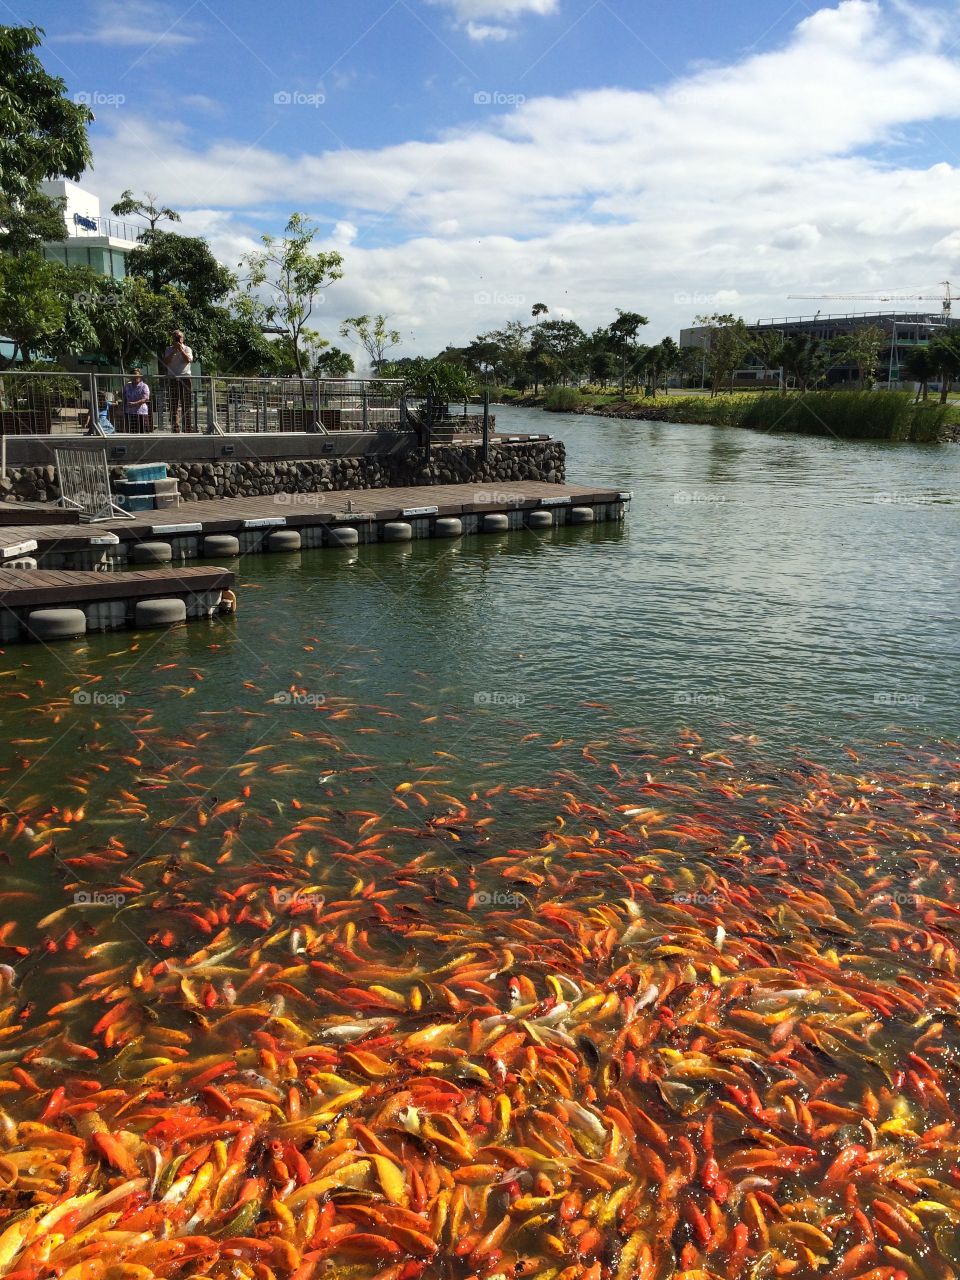 Koi's there, Koi's everywhere. So satisfying to look at. 